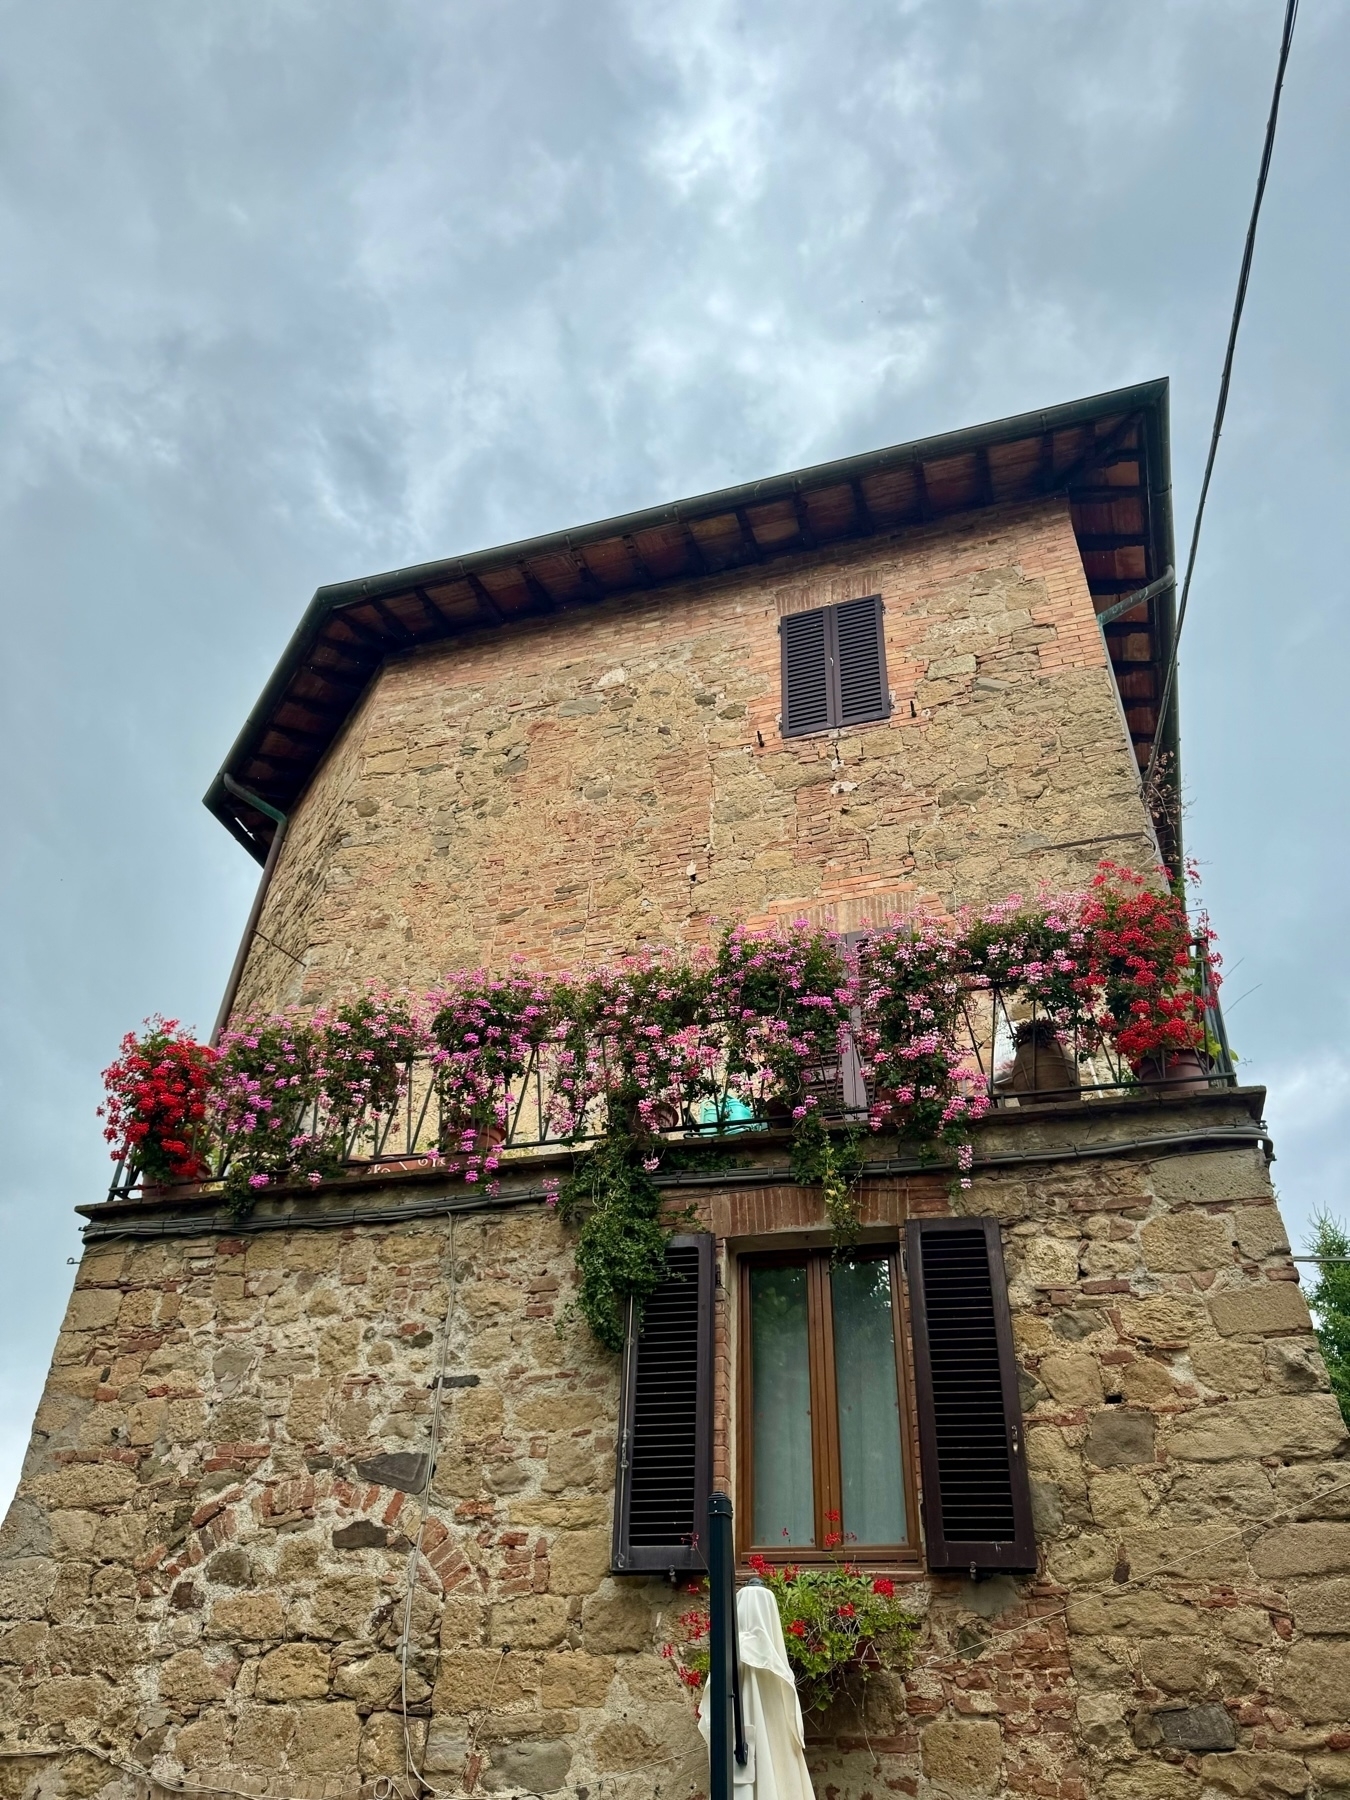 A rustic stone building with wooden window shutters, featuring vibrant flowers hanging from a balcony. The sky is overcast.